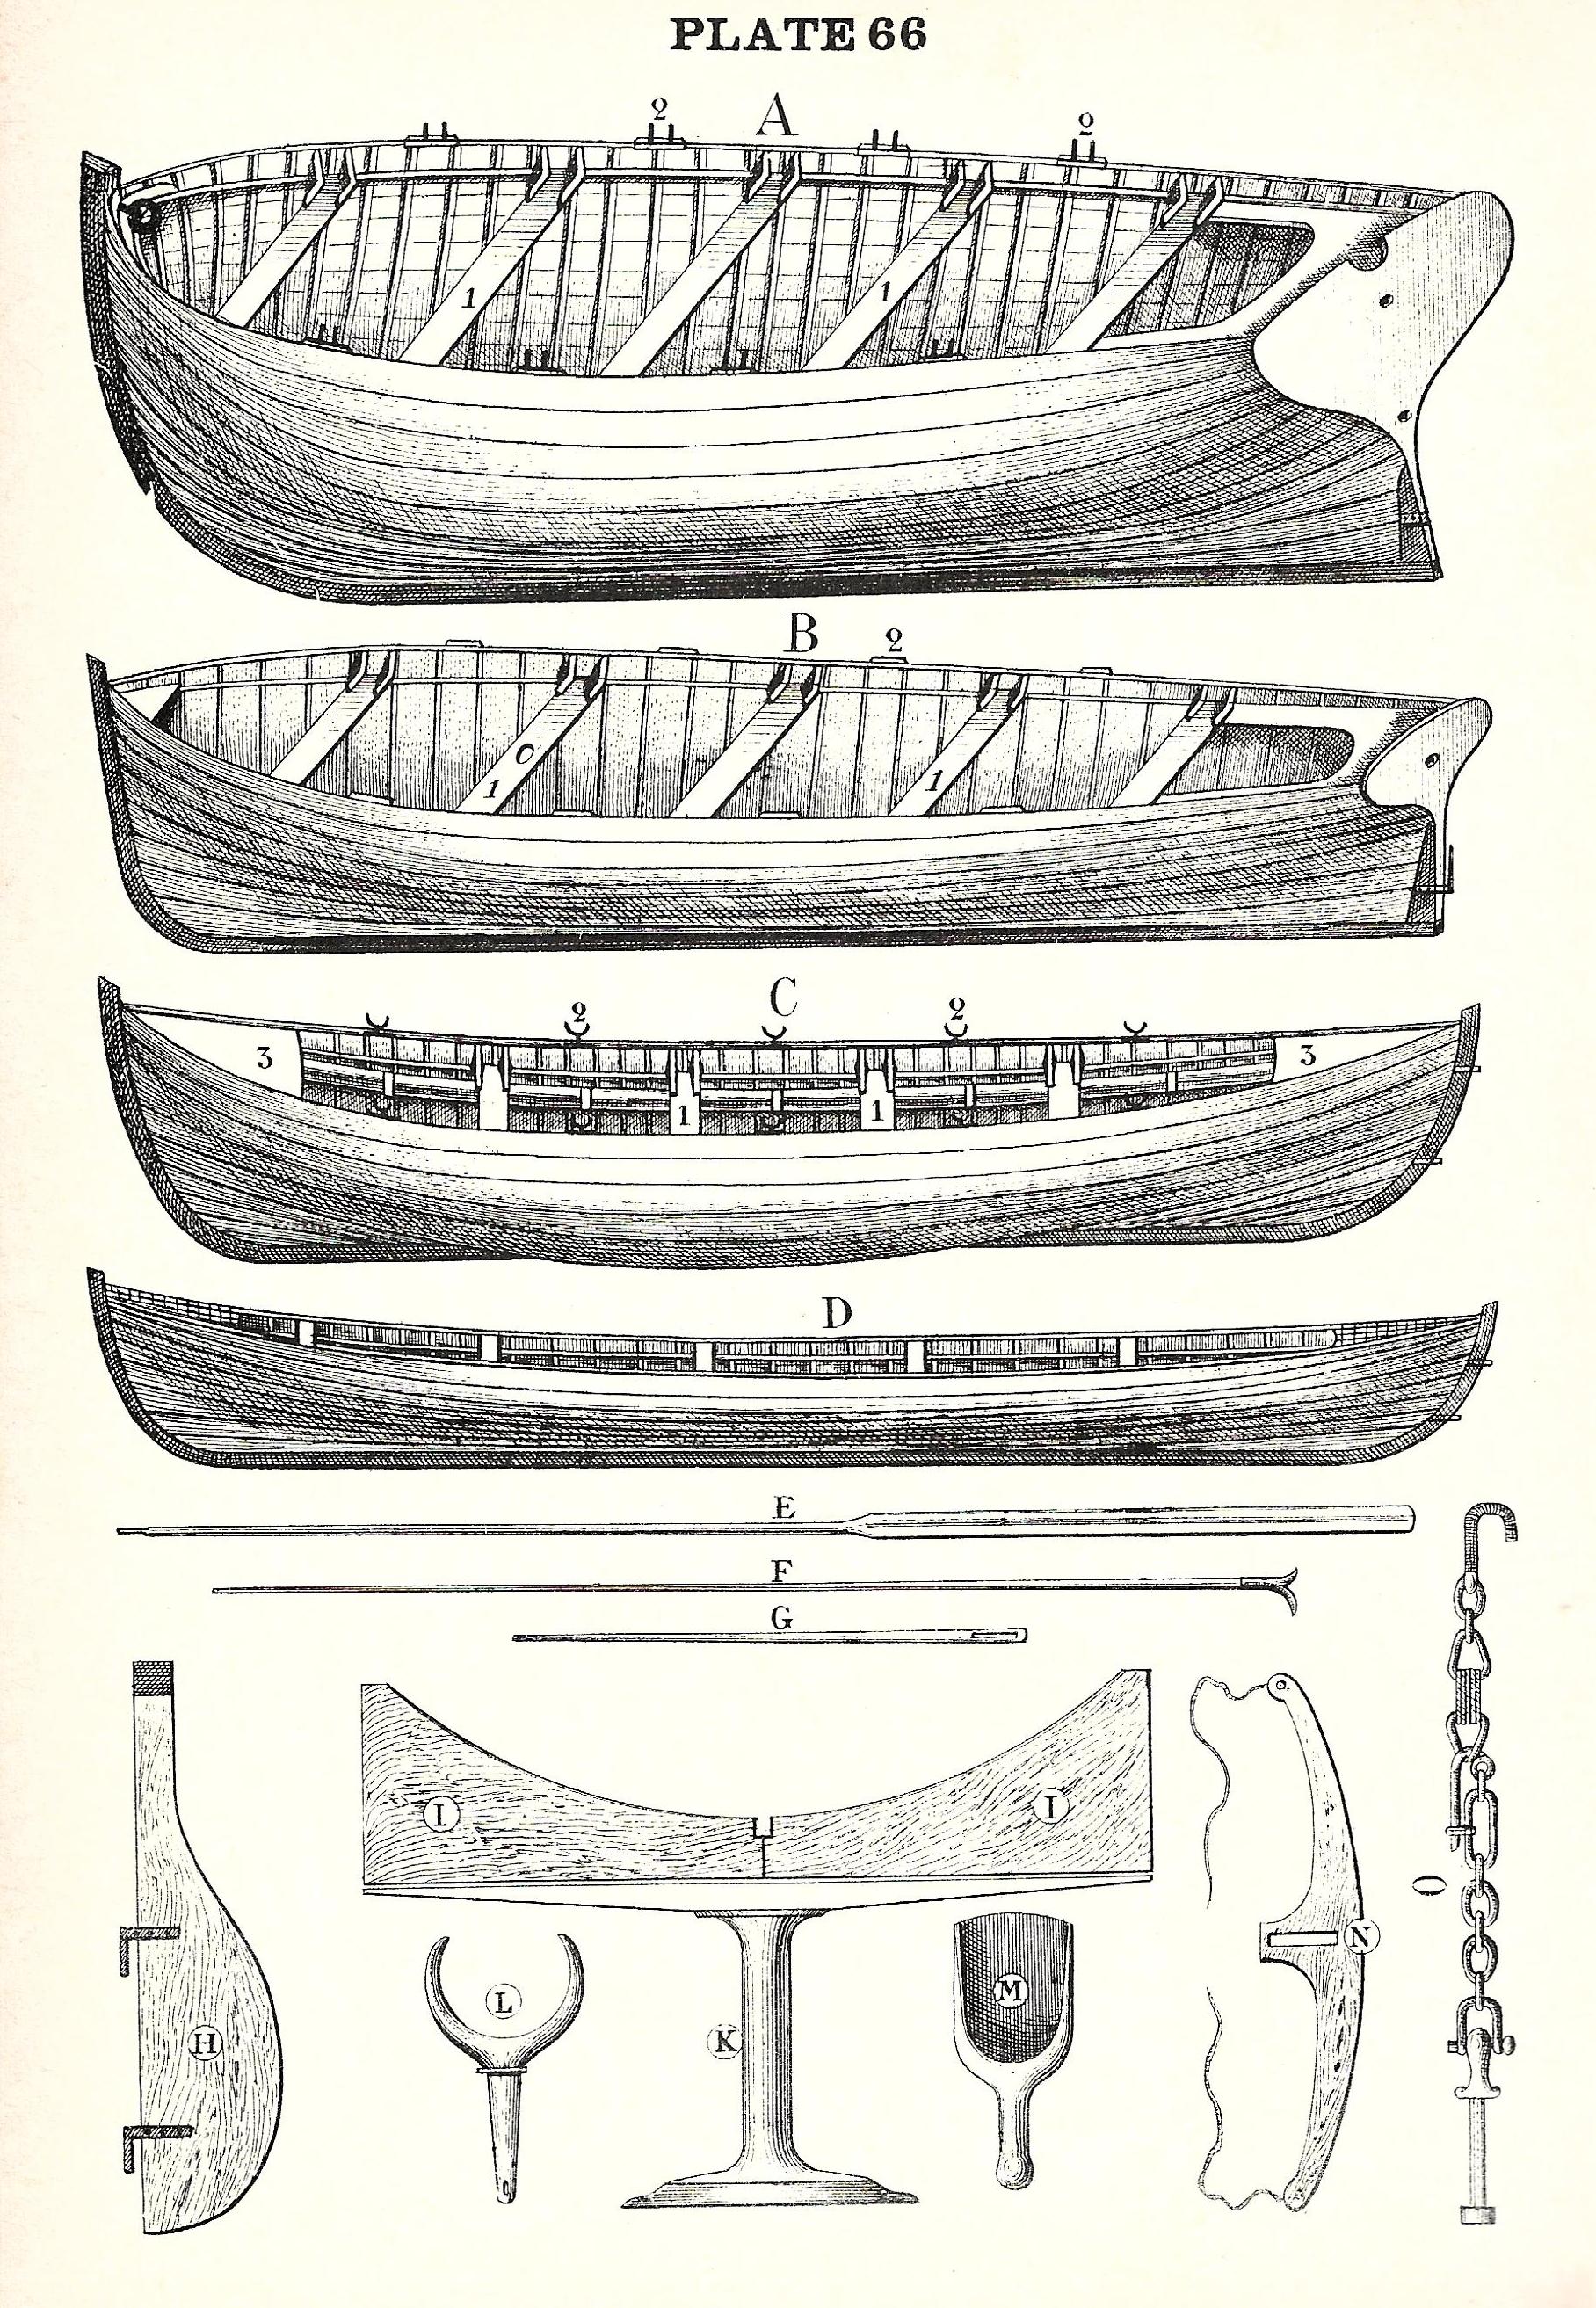 https://upload.wikimedia.org/wikipedia/commons/1/1a/Paasch_Illus_Mar_Ency_1890_pl_66_-_Various_Boats_and_Boat-gear.jpg